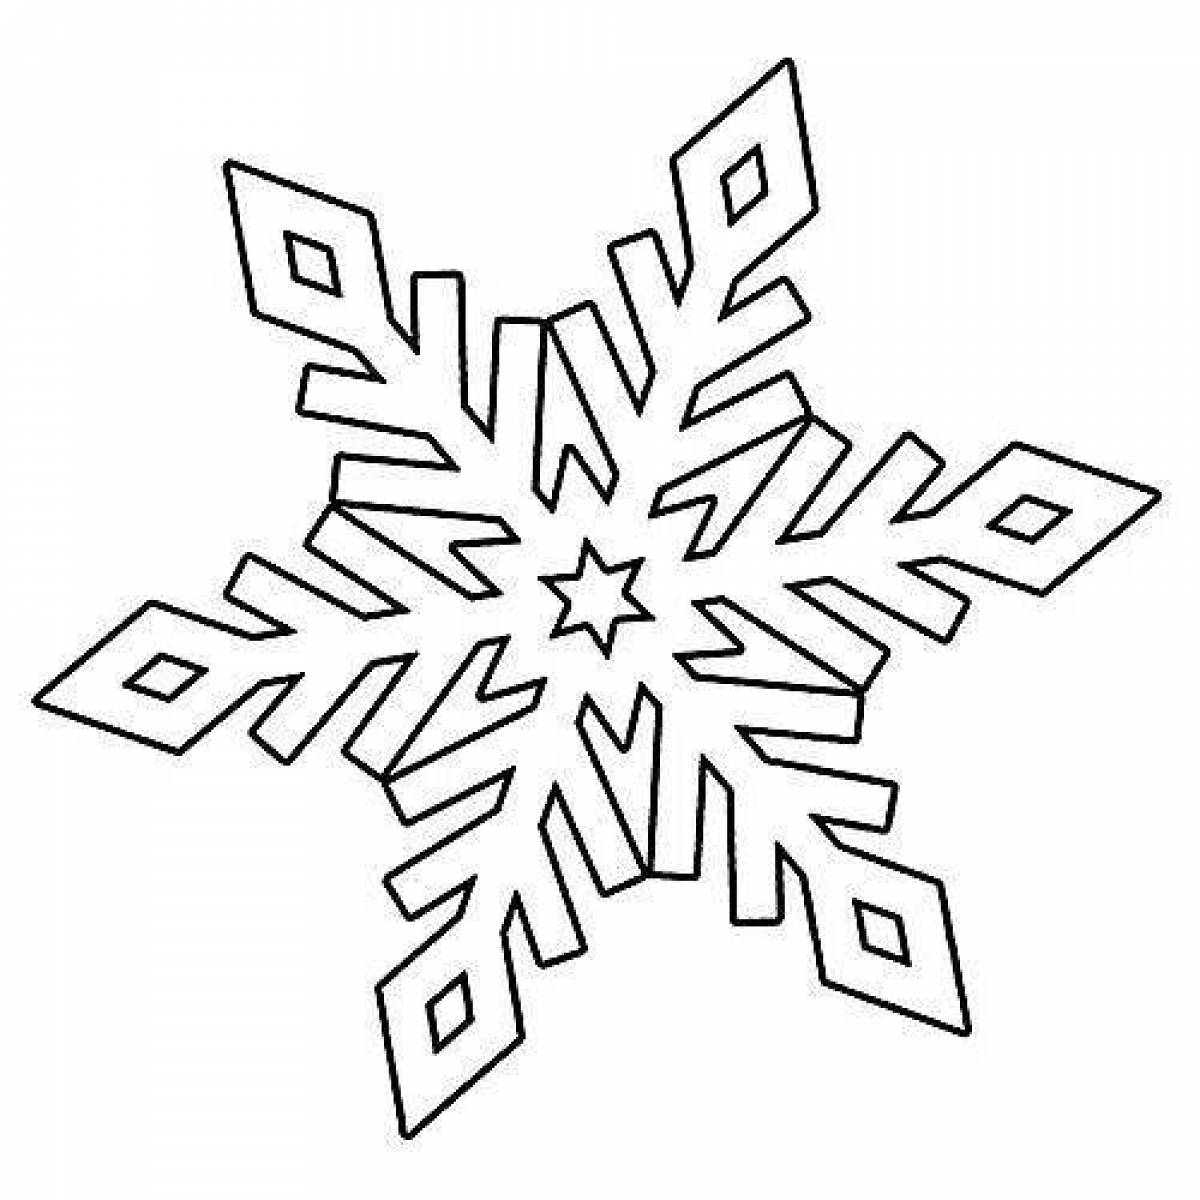 Fascinating snowflake coloring book for kids 3-4 years old